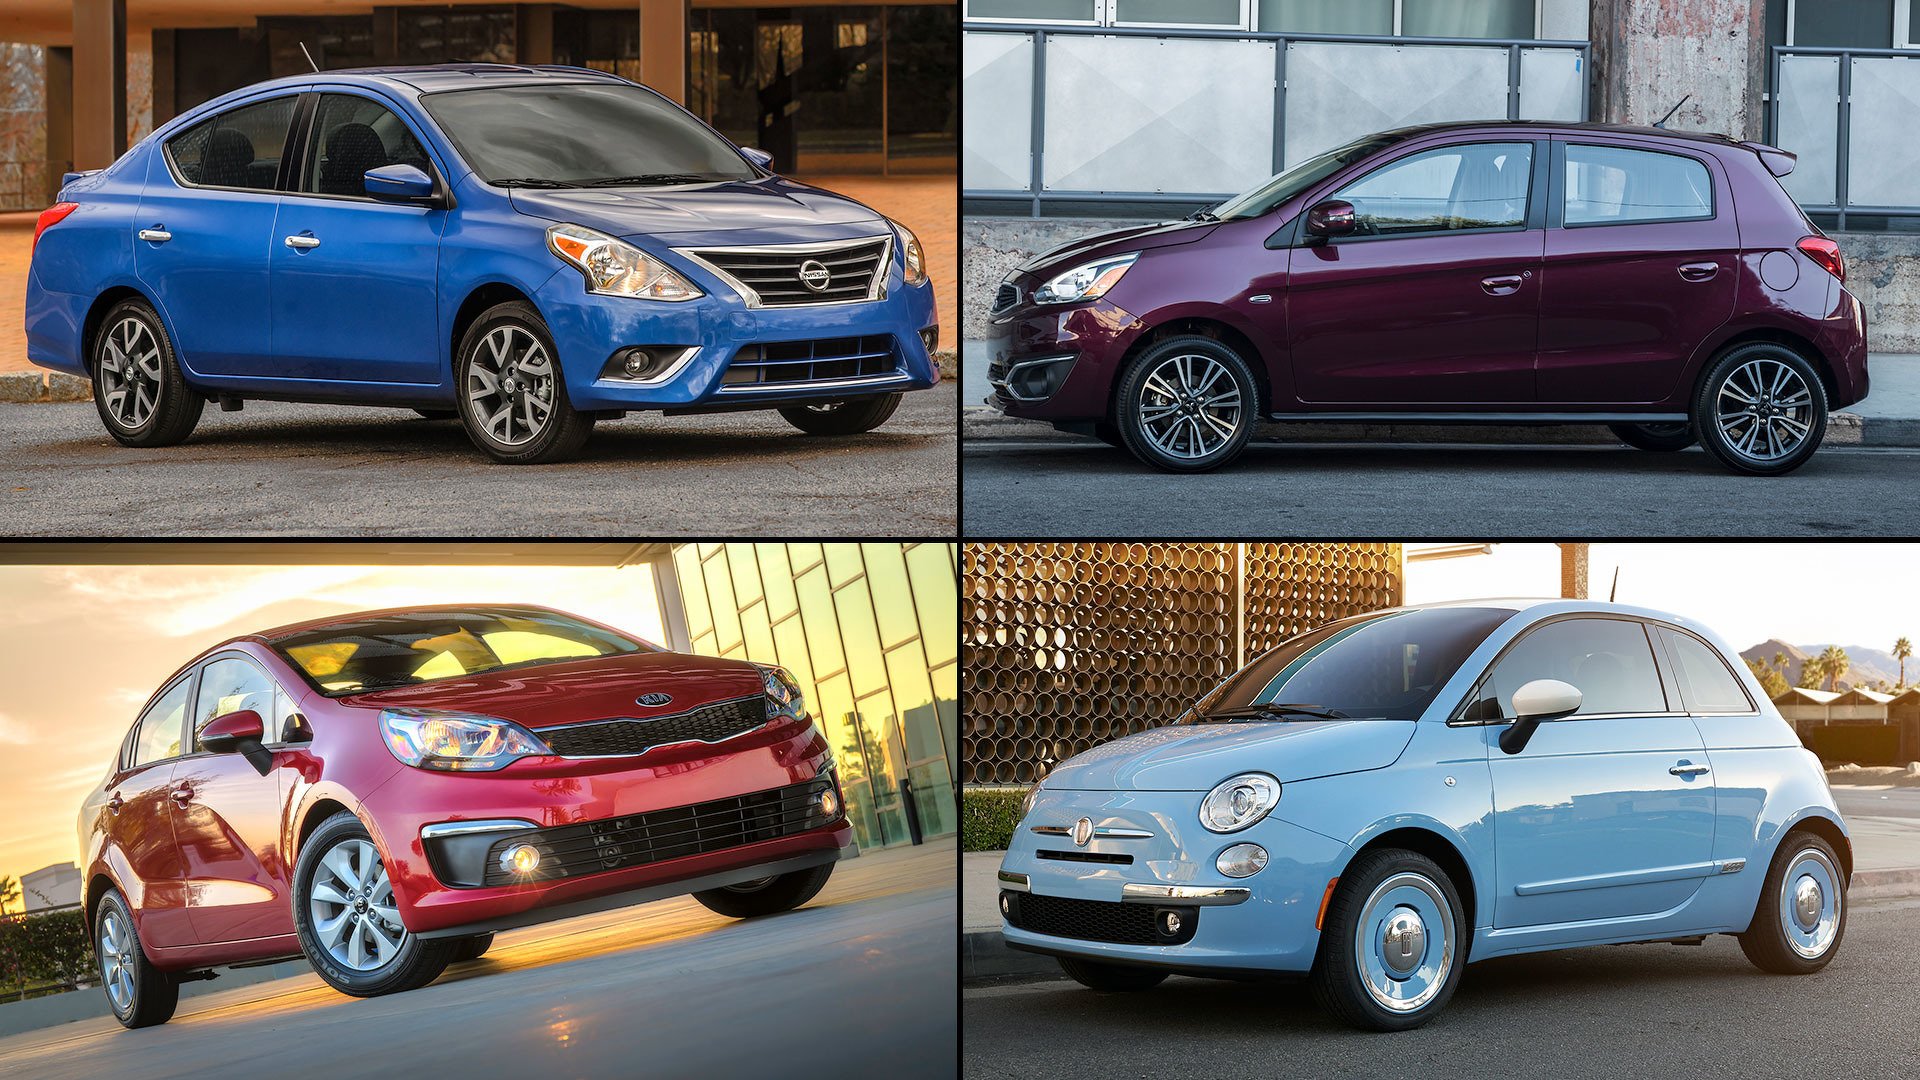 20 Cheapest Cars For Sale In The U.S.